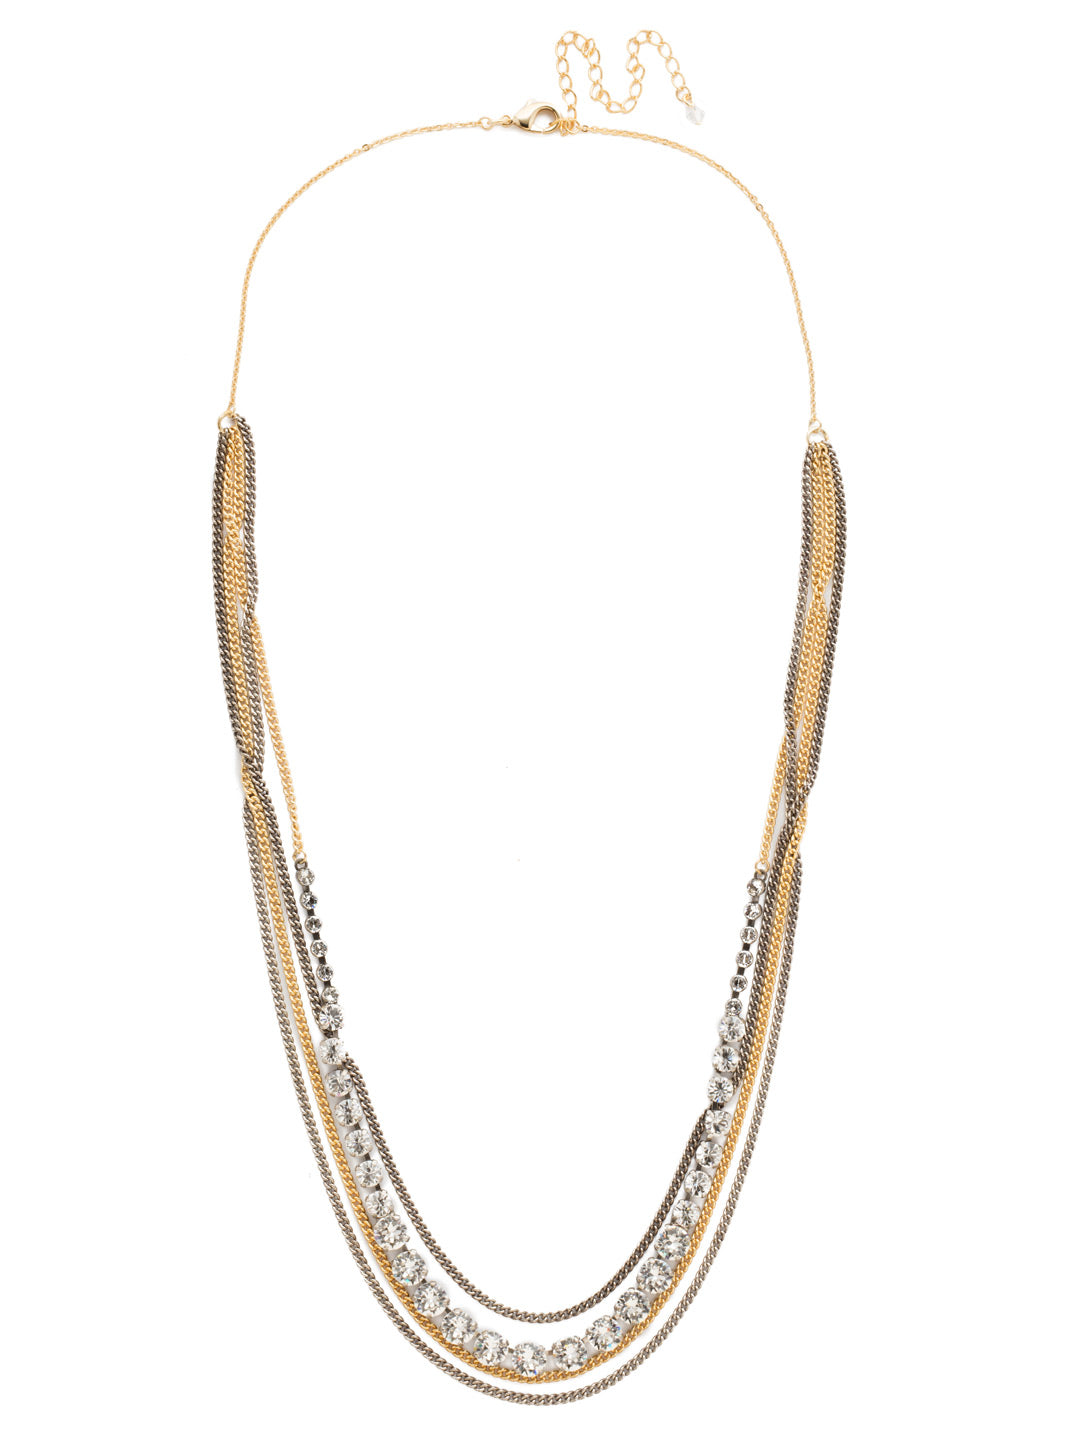 Product Image: Layer It On Multi-Strand Layered Necklace